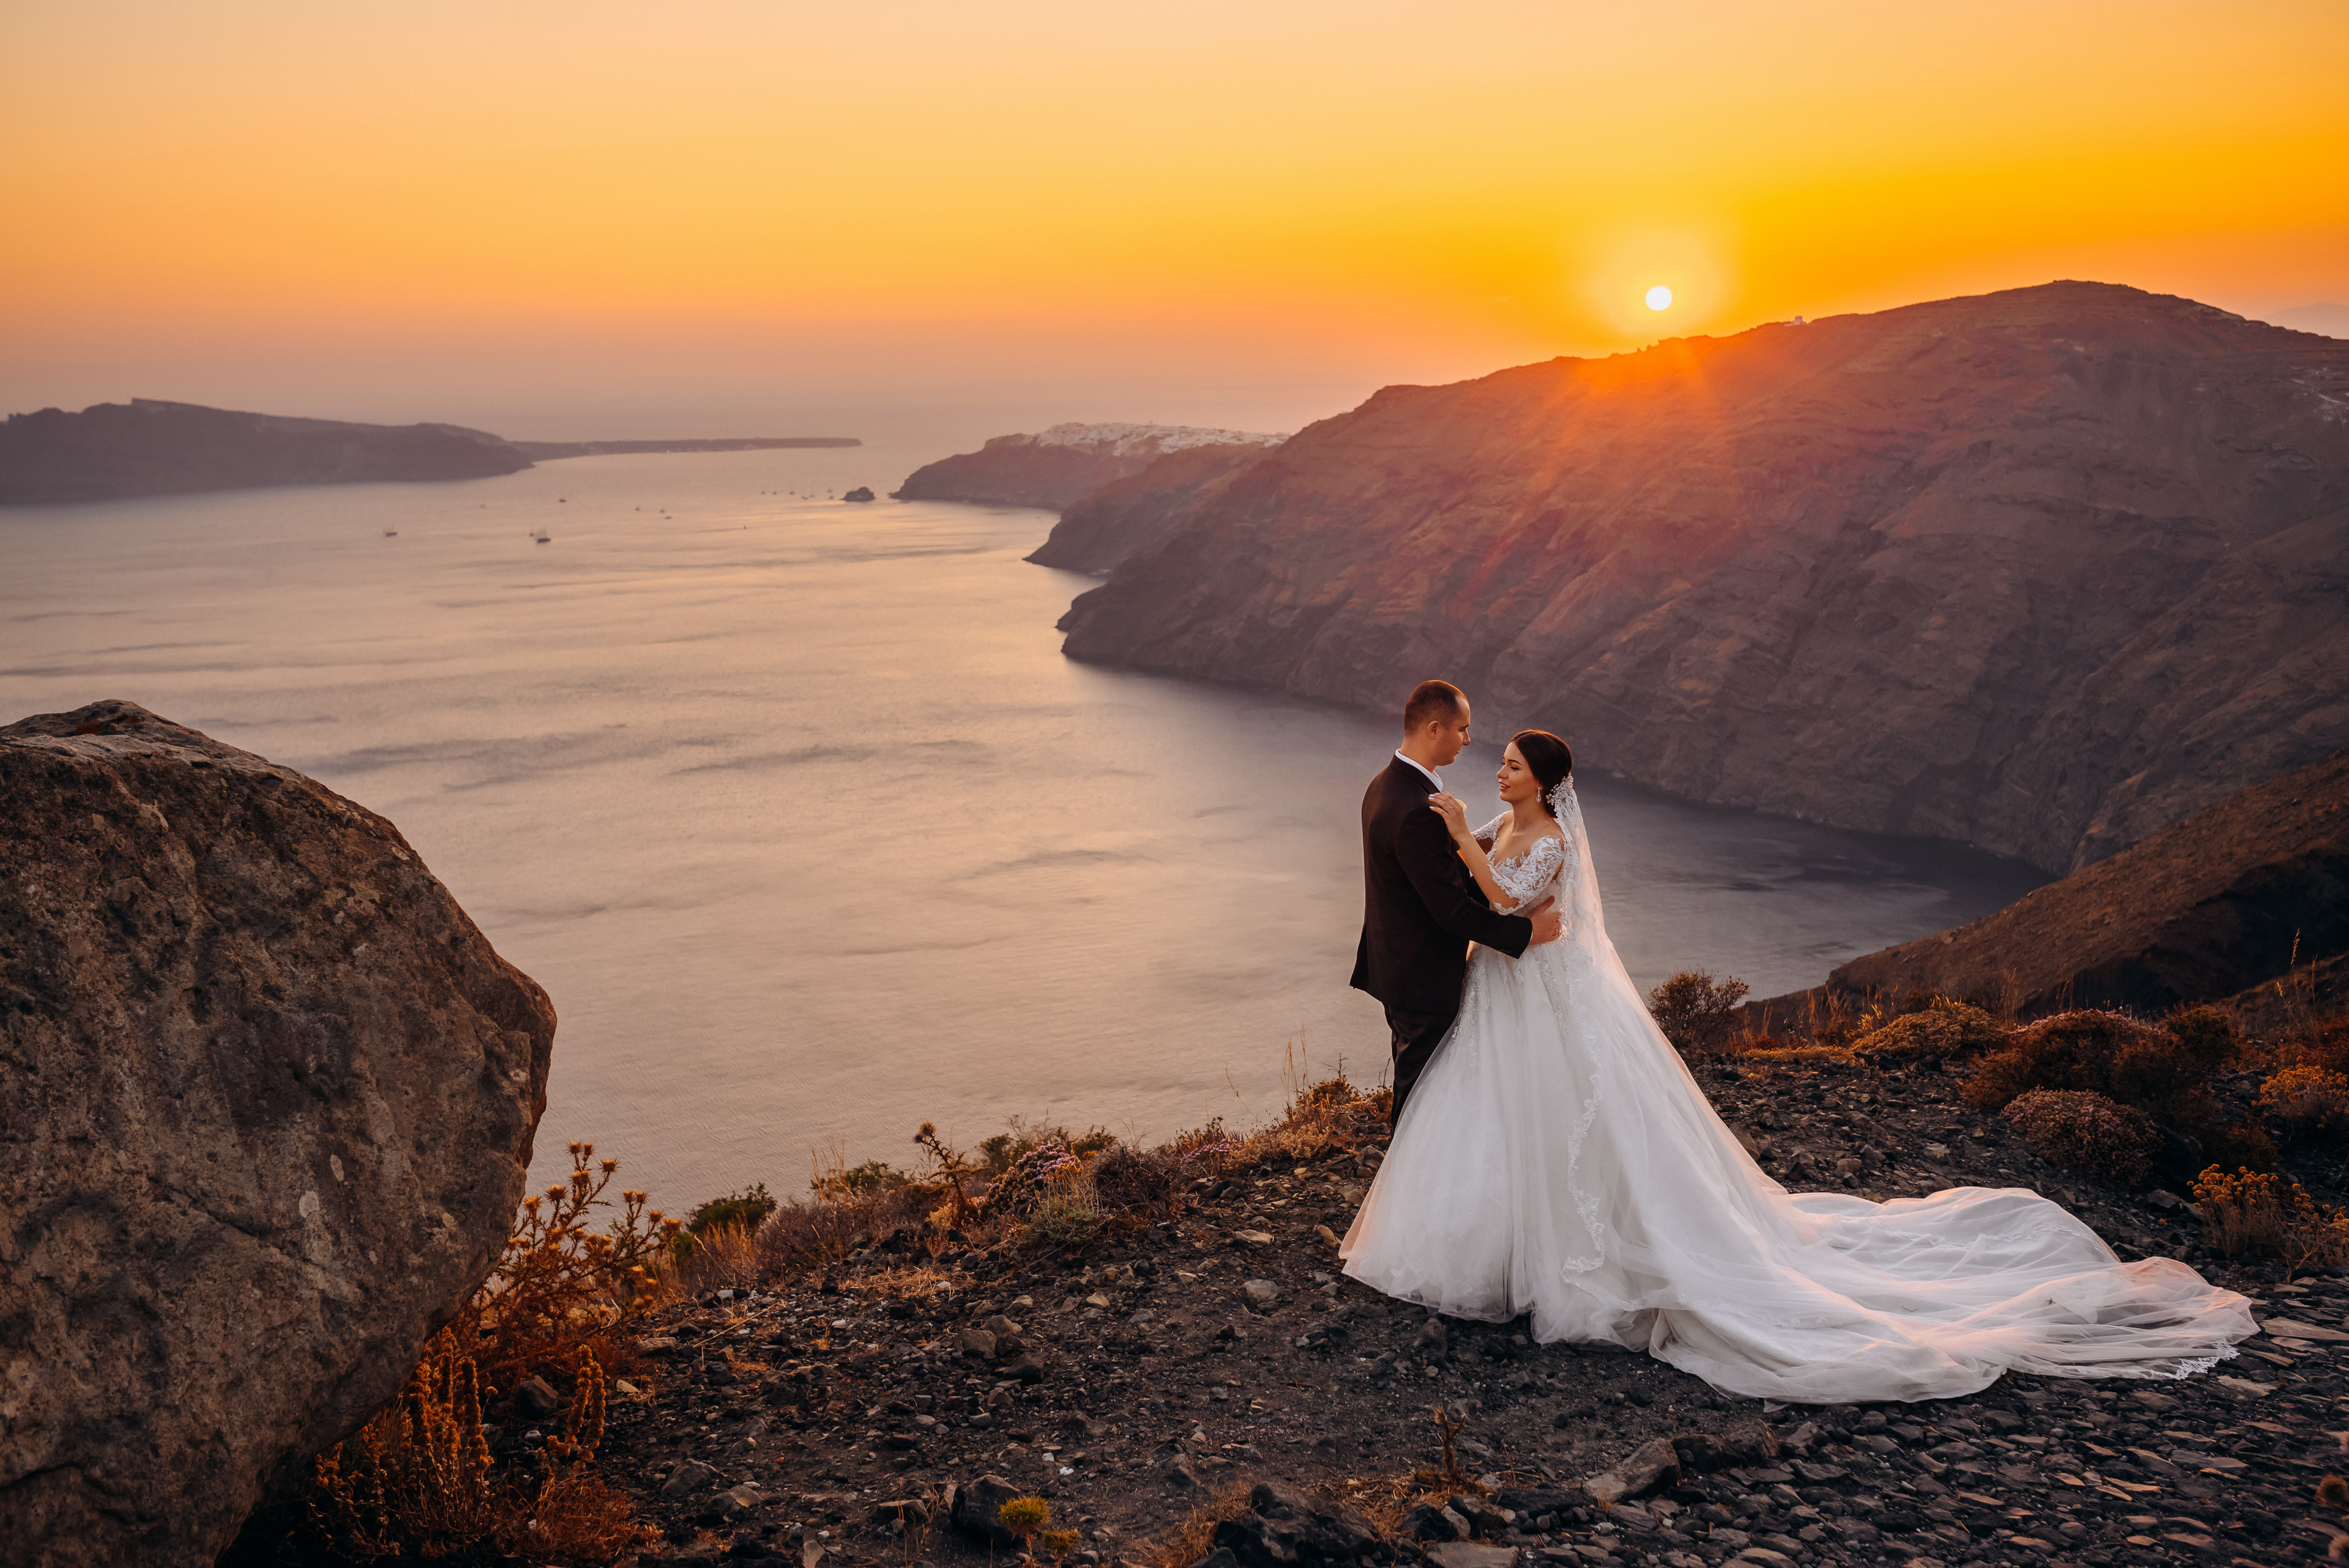 Documents you need to get married abroad. Official weddings, ceremony only or church weddings on Santorini: wedding in santorini, Julia Veselova wedding agency - Photo 3